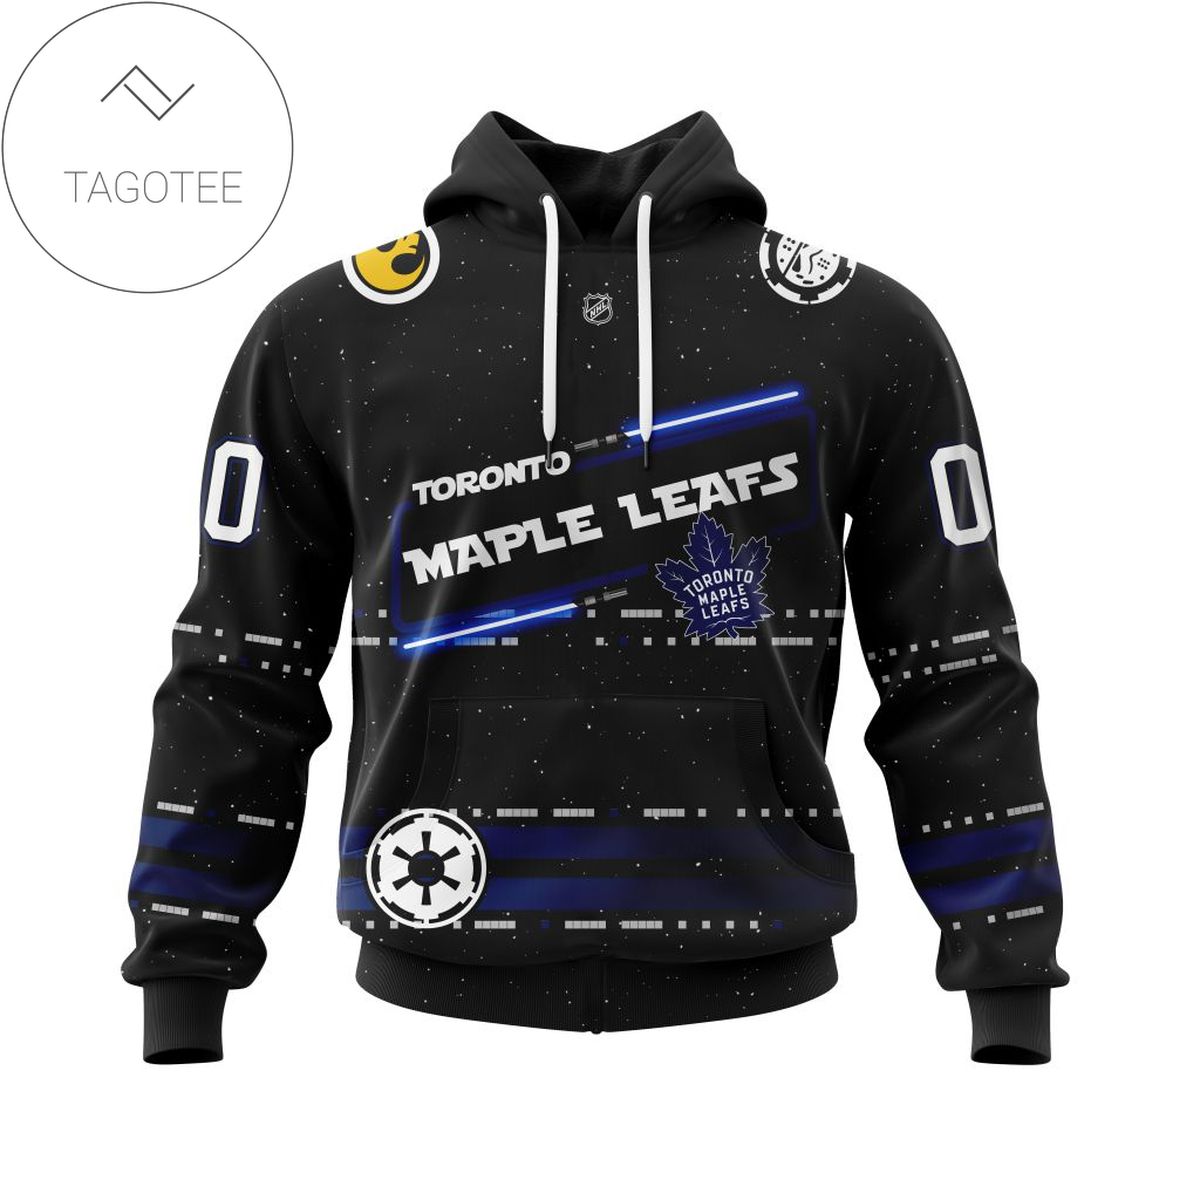 Toronto Maple Leafs Personalized Star Wars May The 4th Be With You Jersey Shirt Hoodie